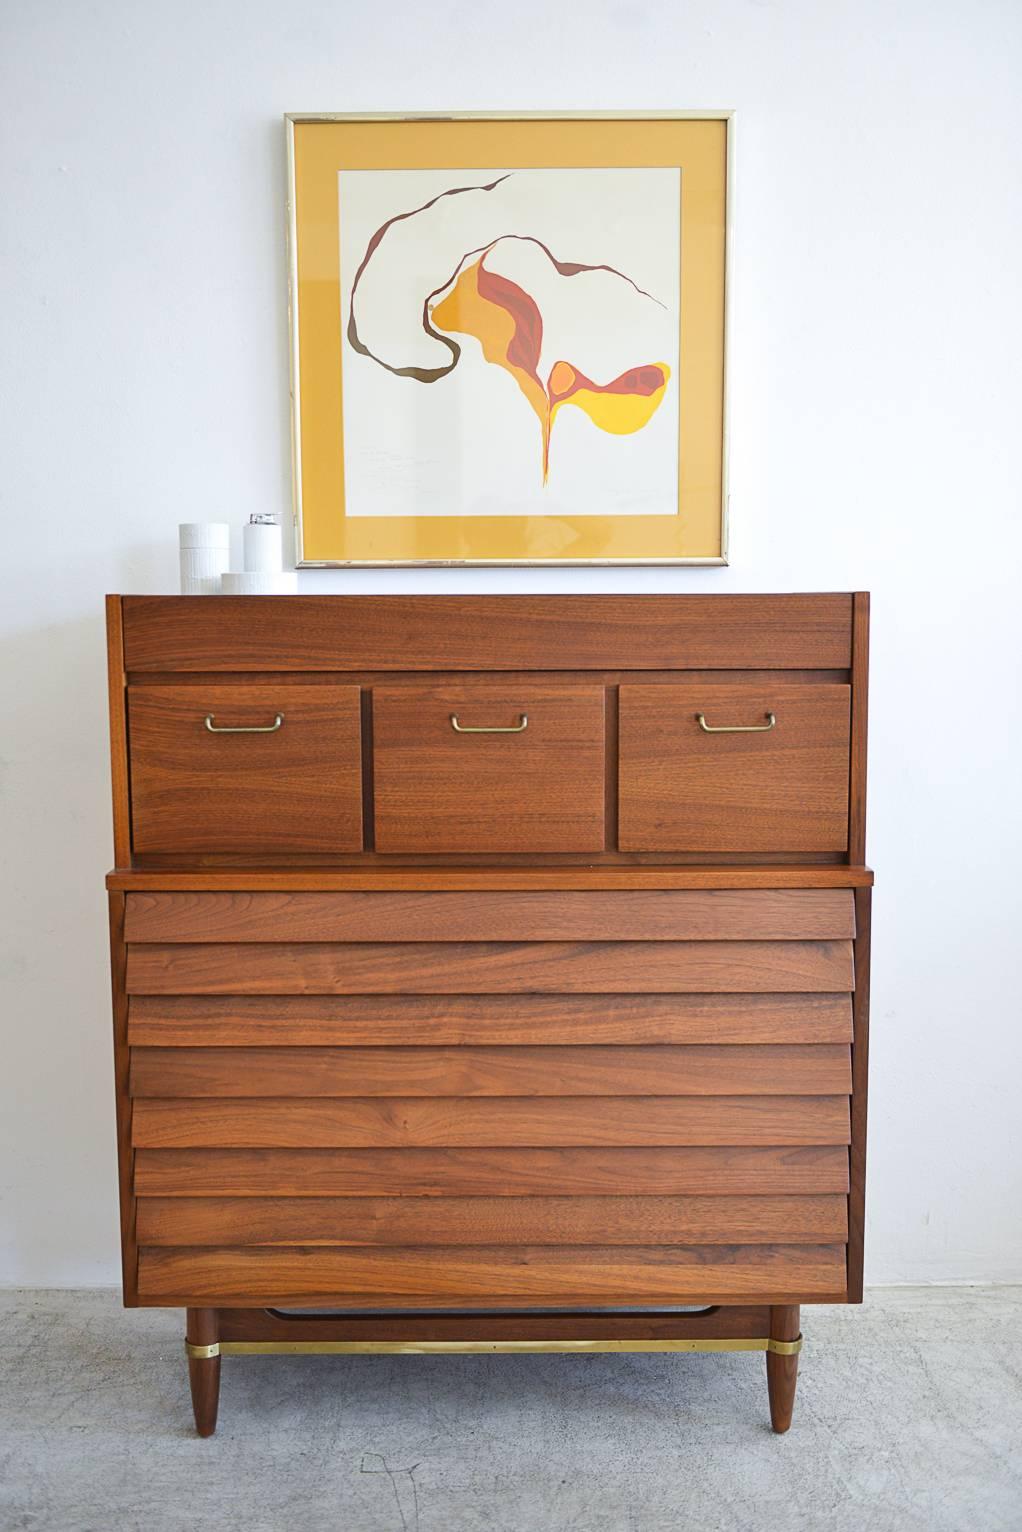 Walnut and brass highboy dresser or gentlemen's chest by Merton Gershun for American of Martinsville. Original brass hardware detail. Professionally restored in showroom condition. Offers lots of storage options for smaller spaces.

Measures: 38